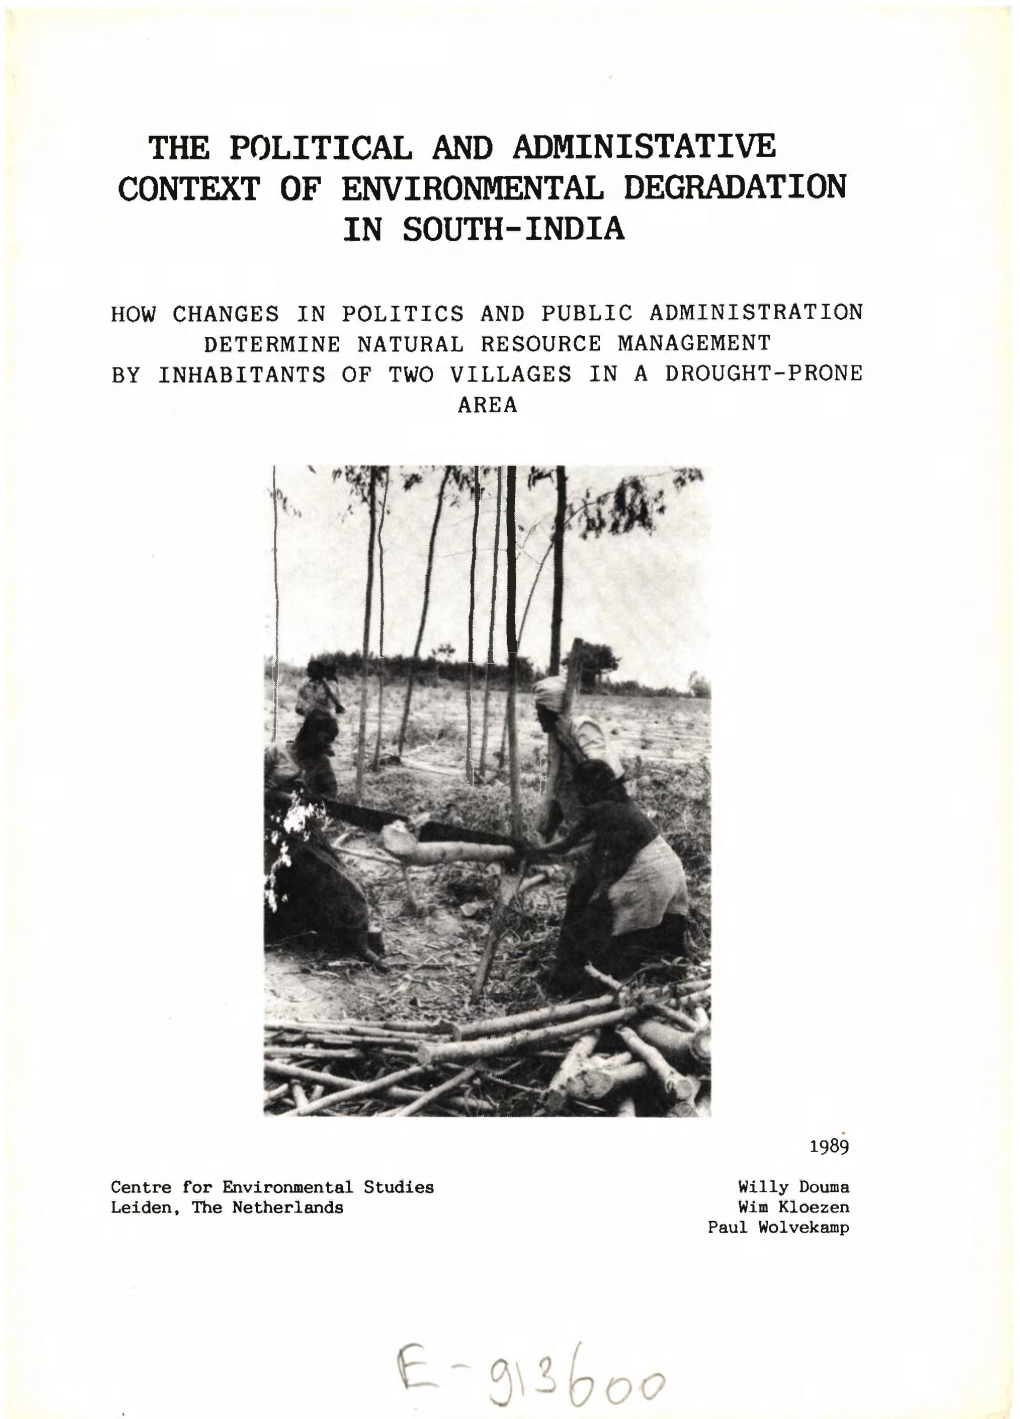 The Political and Administative Context of Environmental Degradation in South-India